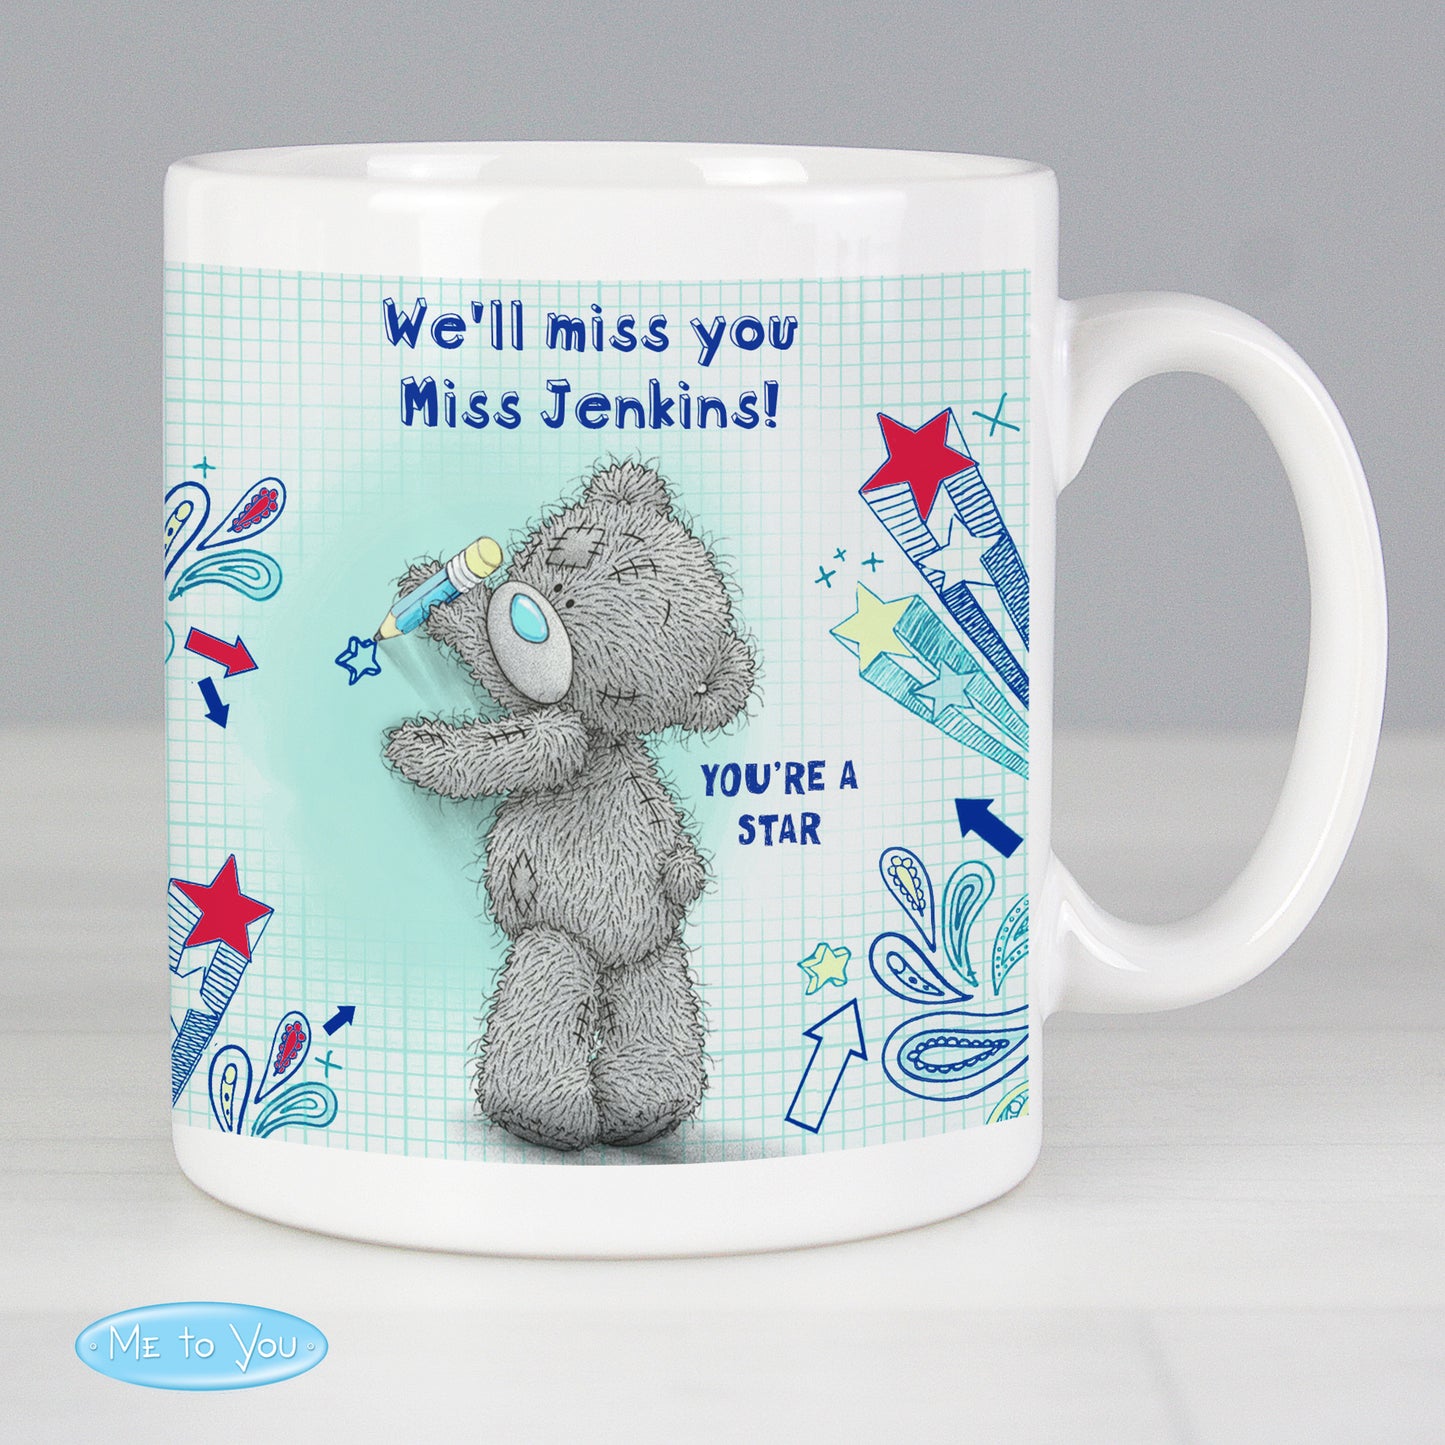 Personalised Me to you Teacher Mug - Personalise It!